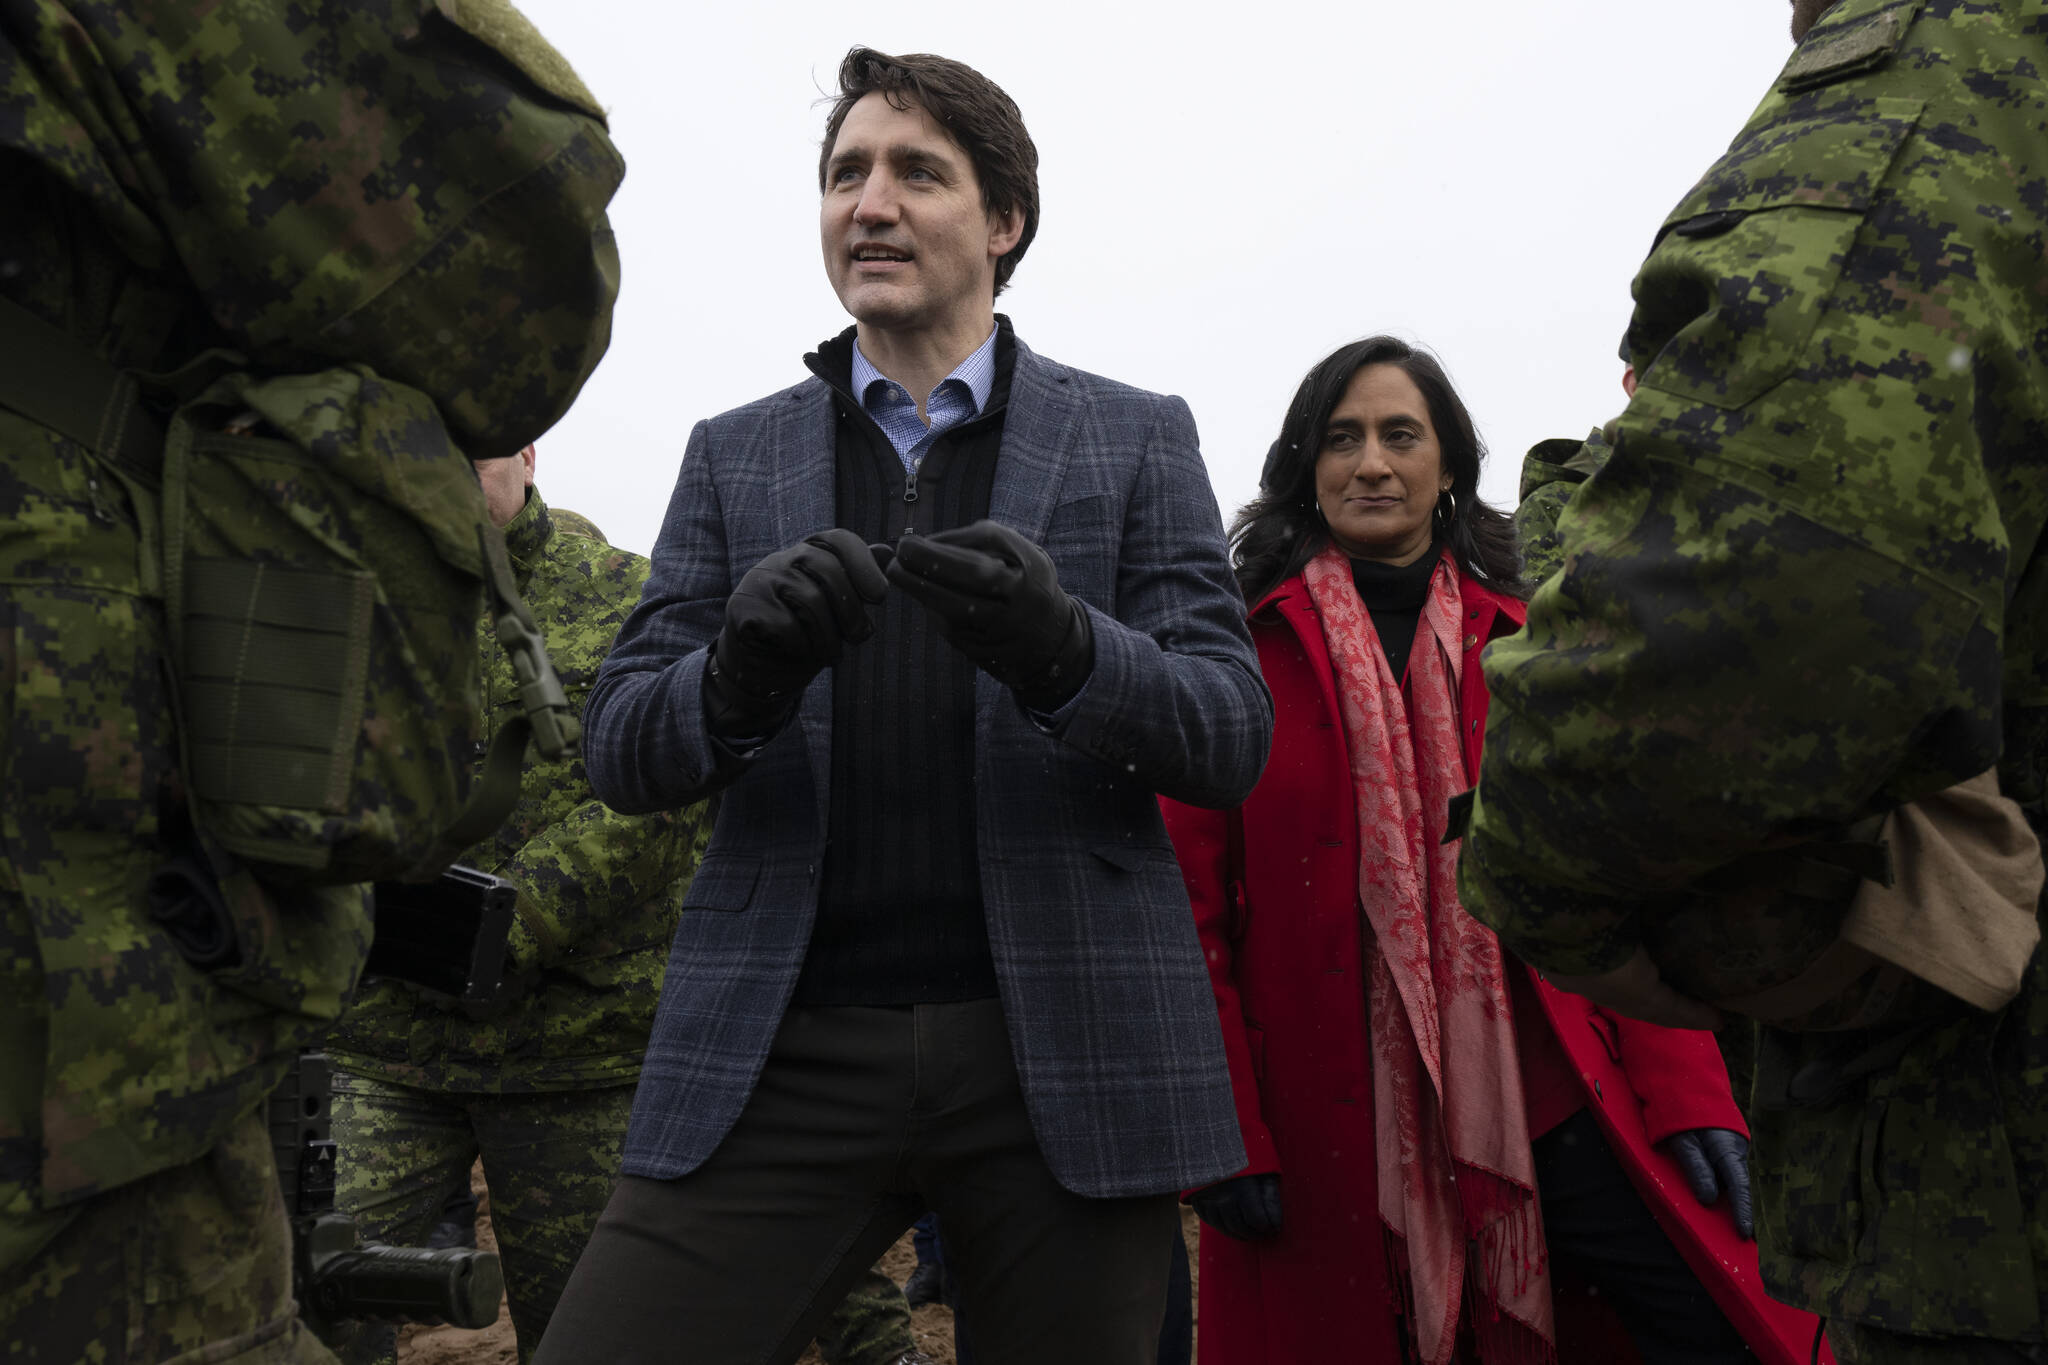 Canadian Prime Minister Justin Trudeau and Minister of Defence Anita Anand speak with Canadian troops deployed on Operation Reassurance as he visits the Adazi Military base in Adazi, Latvia, Tuesday, March 8, 2022. THE CANADIAN PRESS/Adrian Wyld